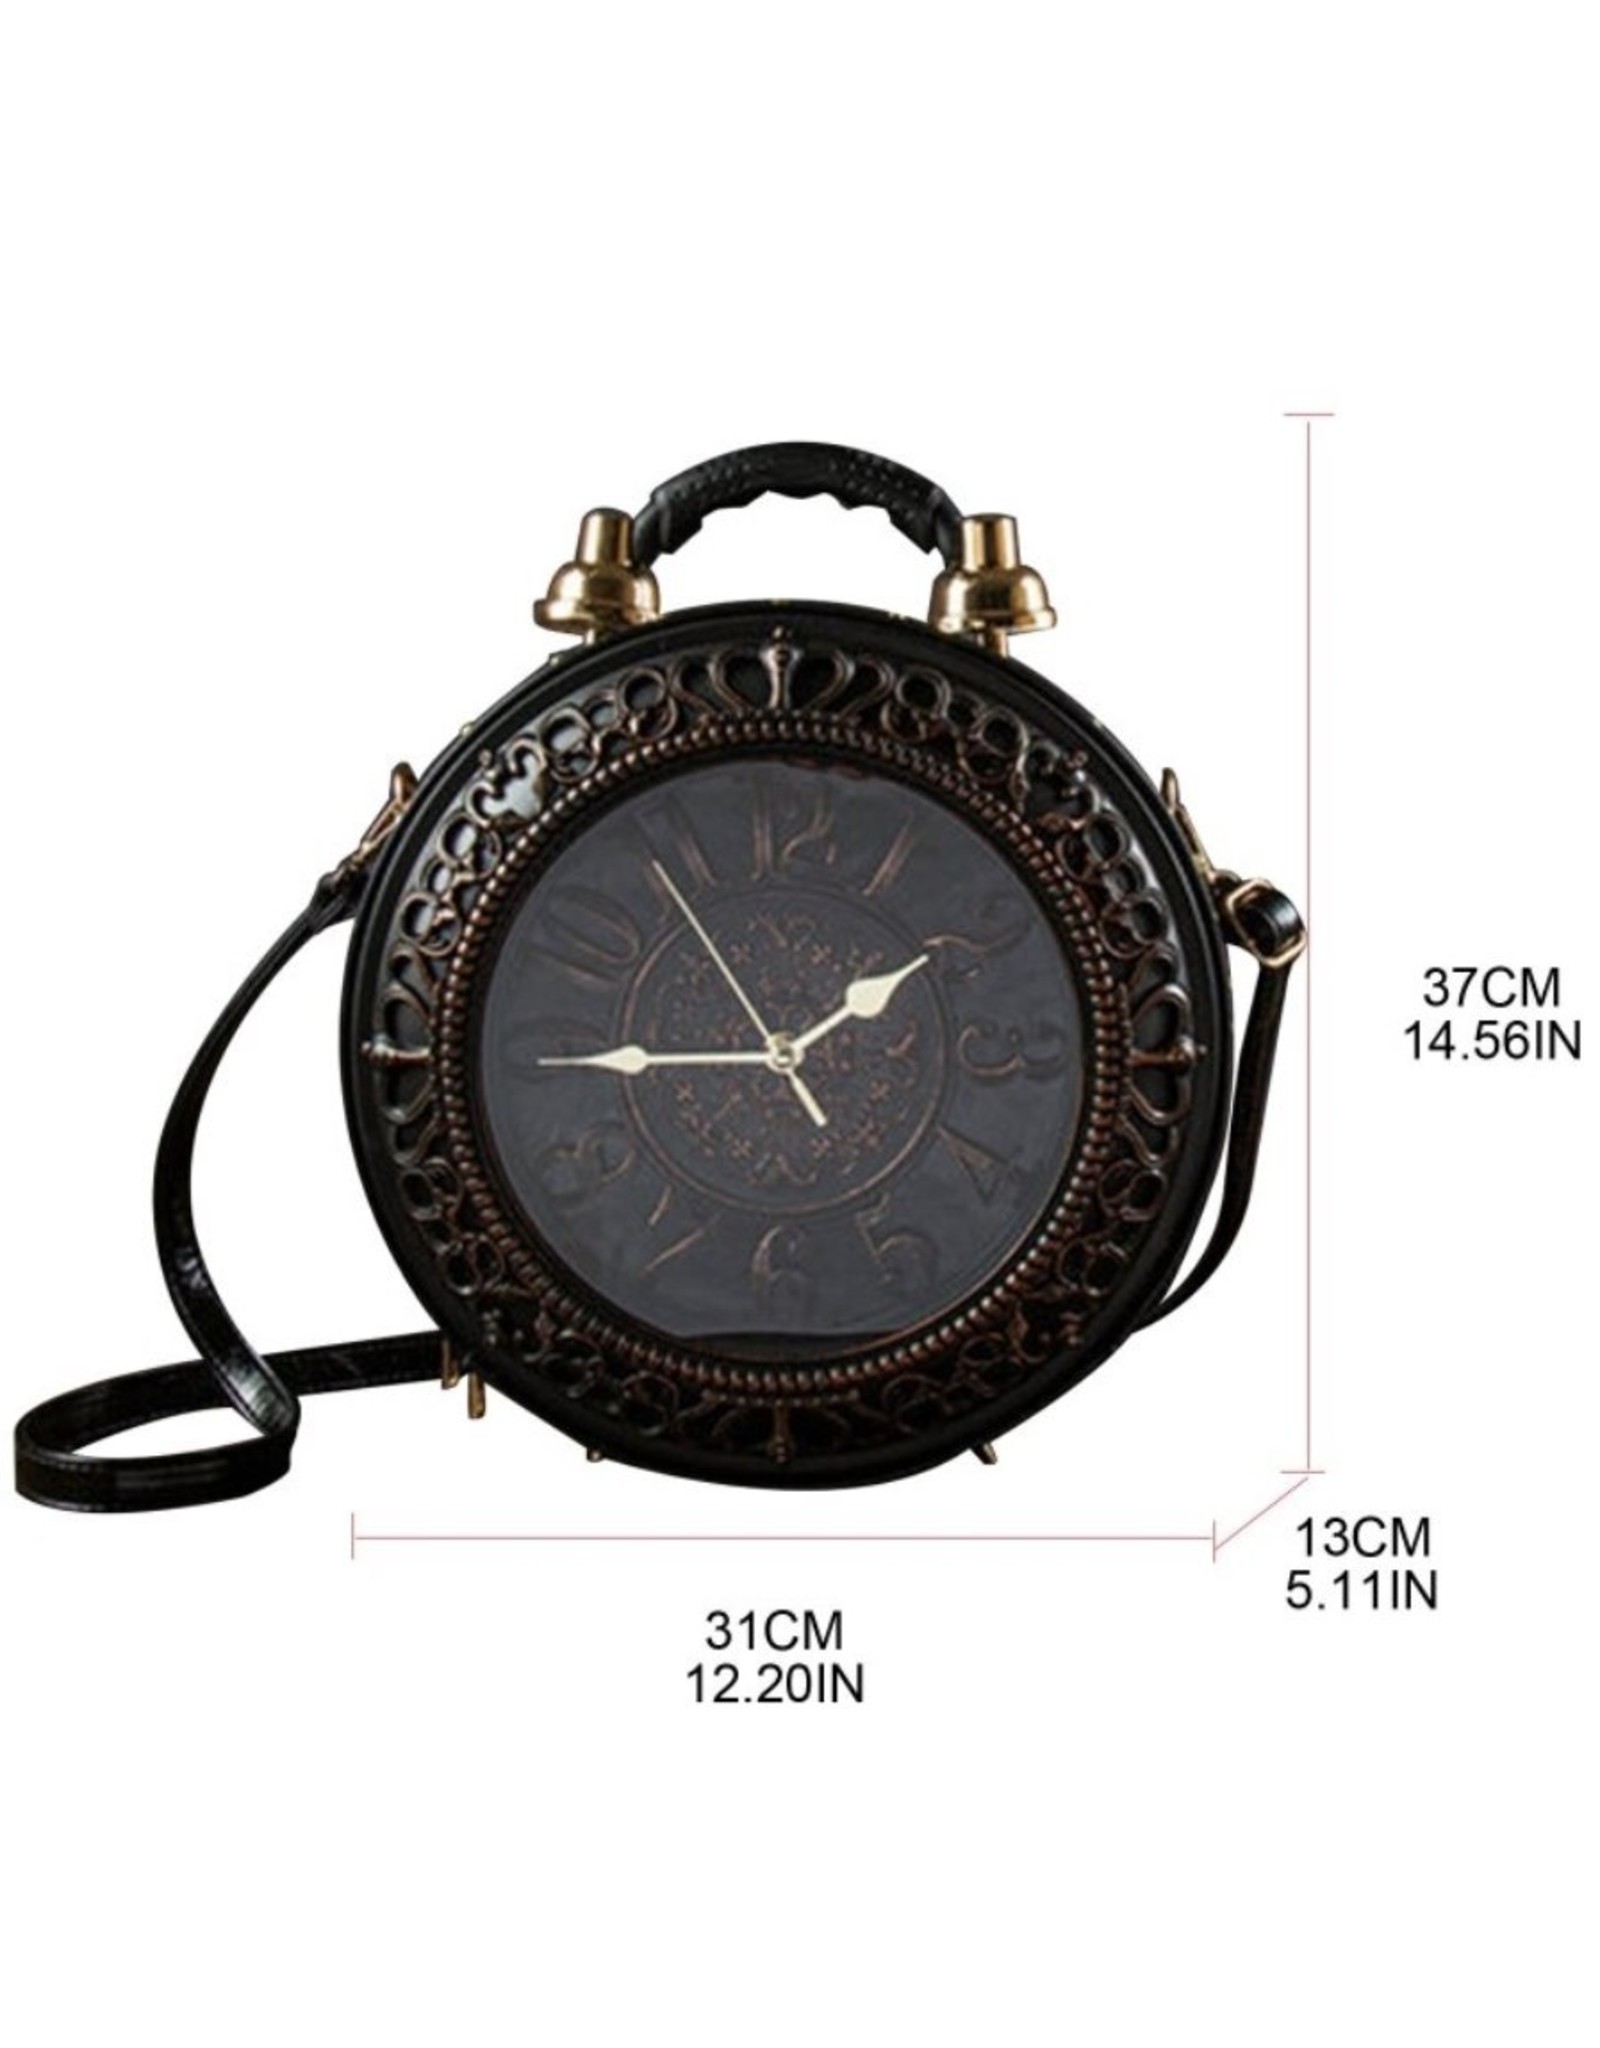 Magic Bags Fantasy bags - Clock bag with Working Clock Vintage Gold